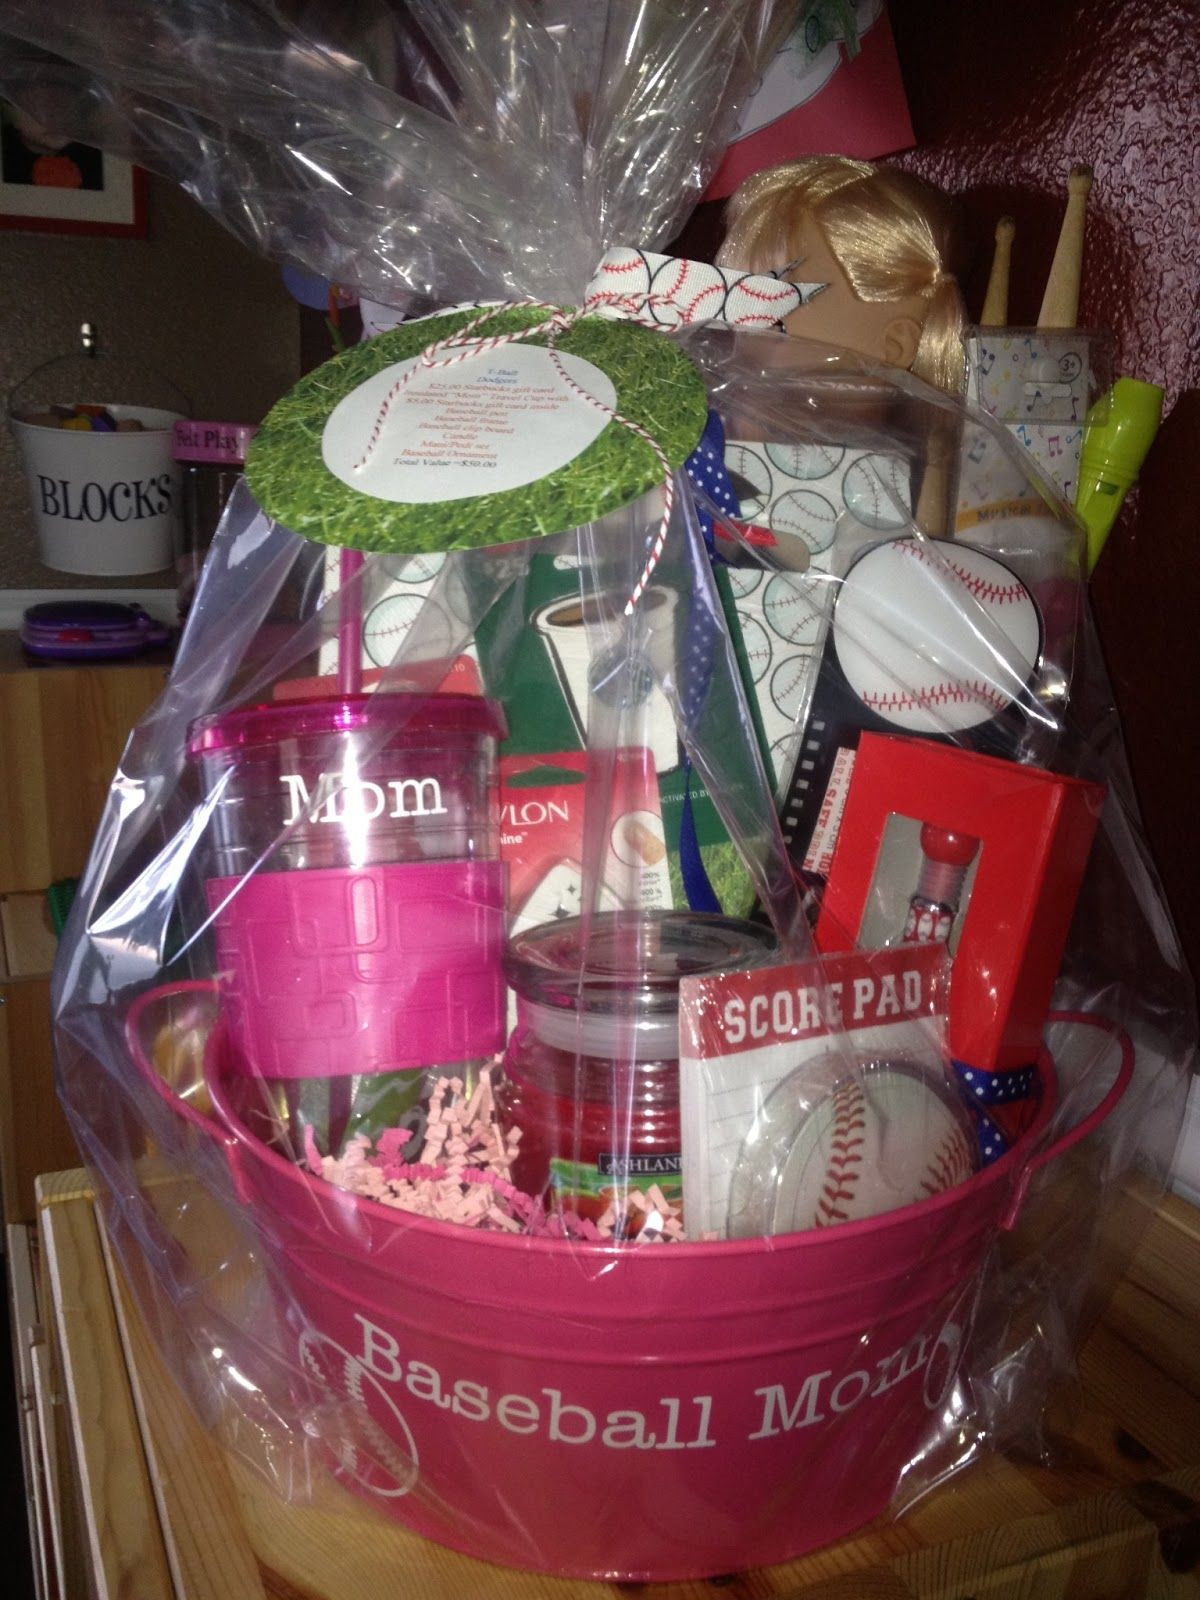 Cheer Coach Gift Basket Ideas
 coach t basket idea Leigh Welch I know it s too late